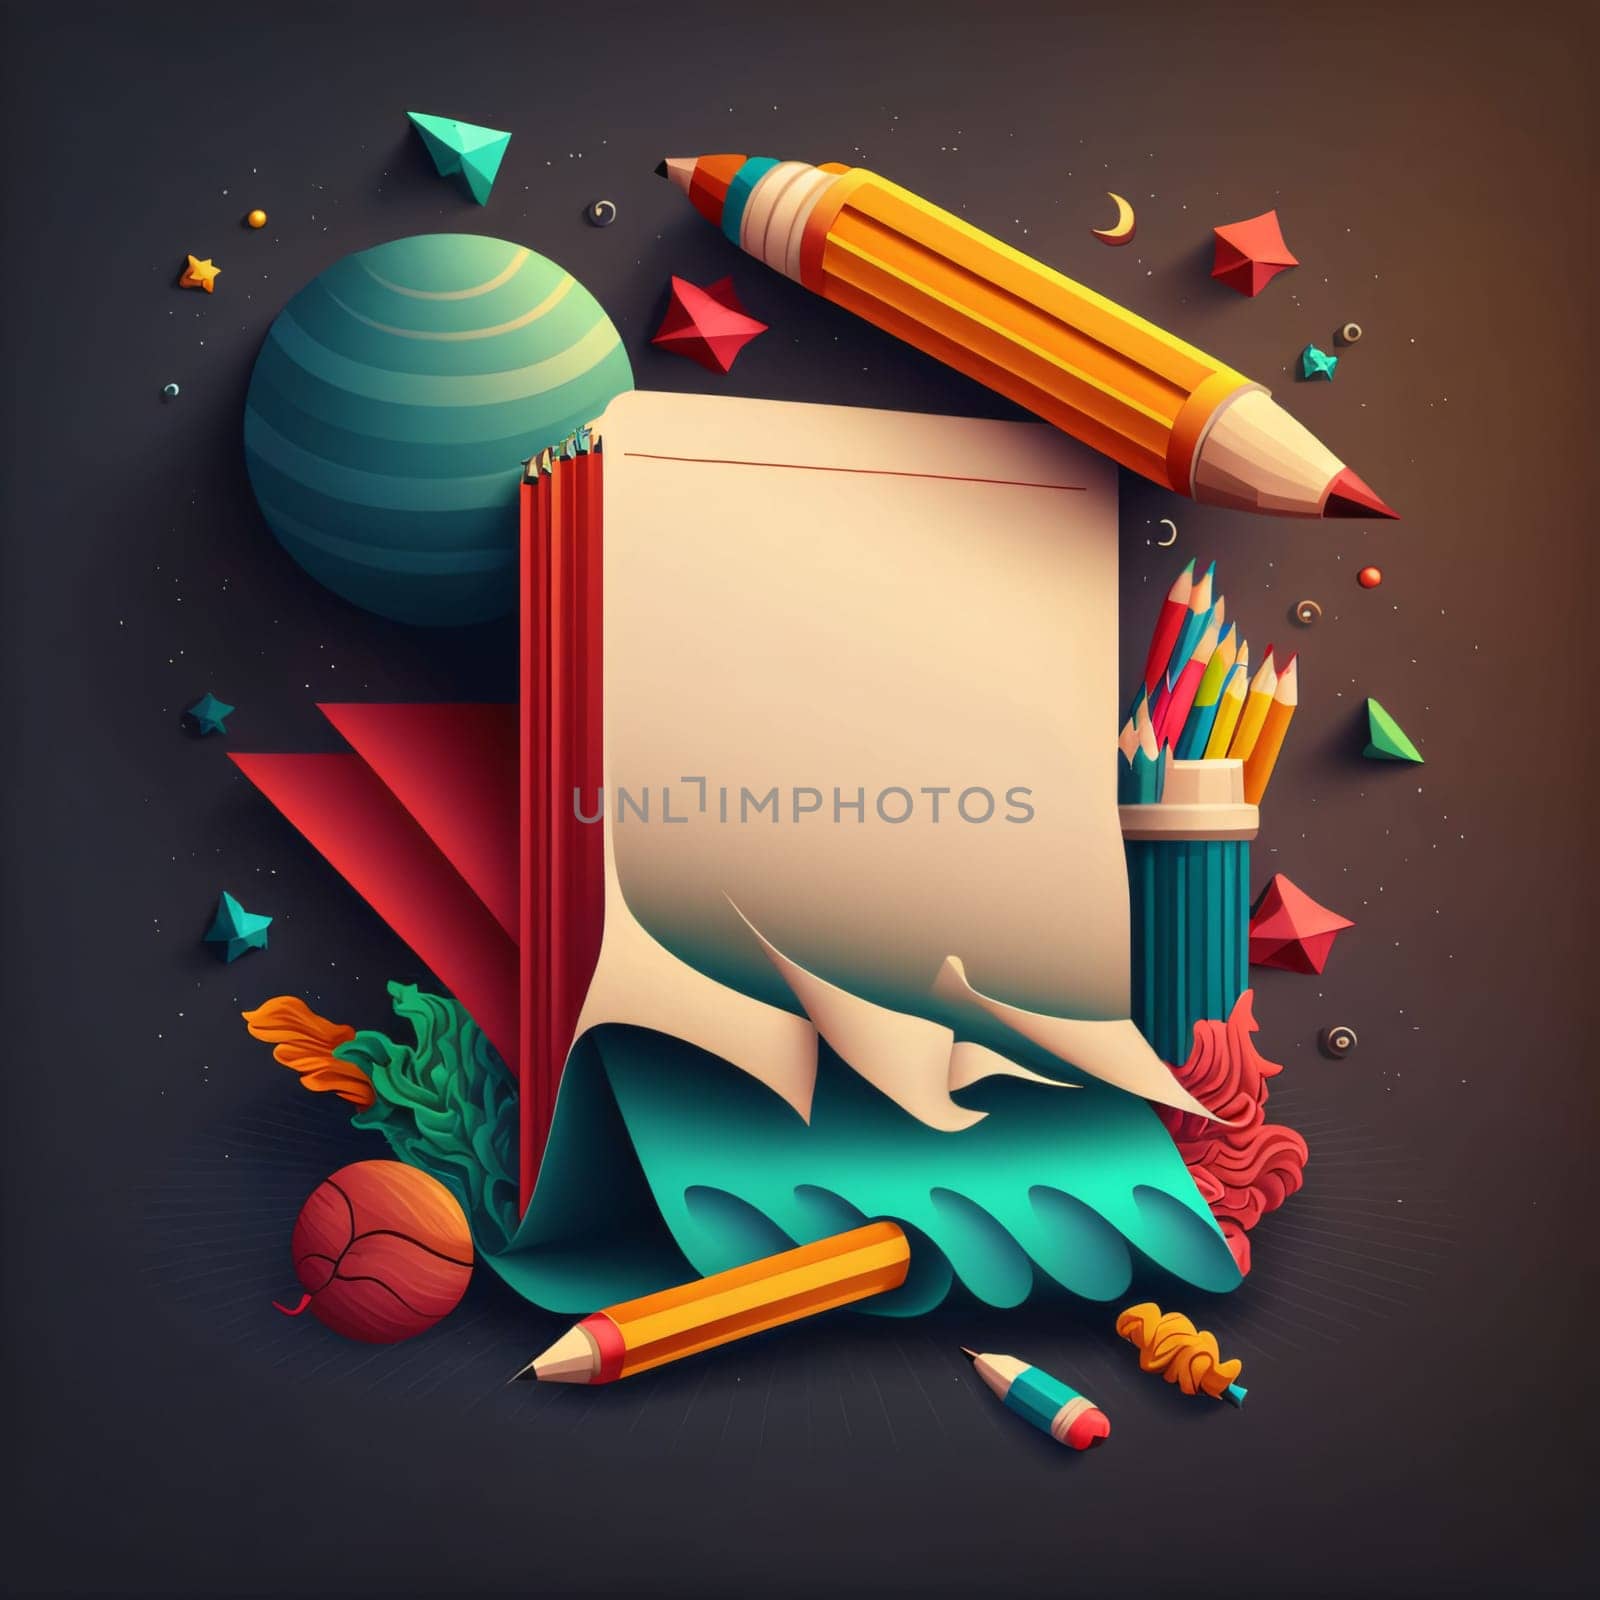 A white blank sheet of paper with space for your own content as an image. Illustration around pencils. Dark background. Graphic with space for your own content.